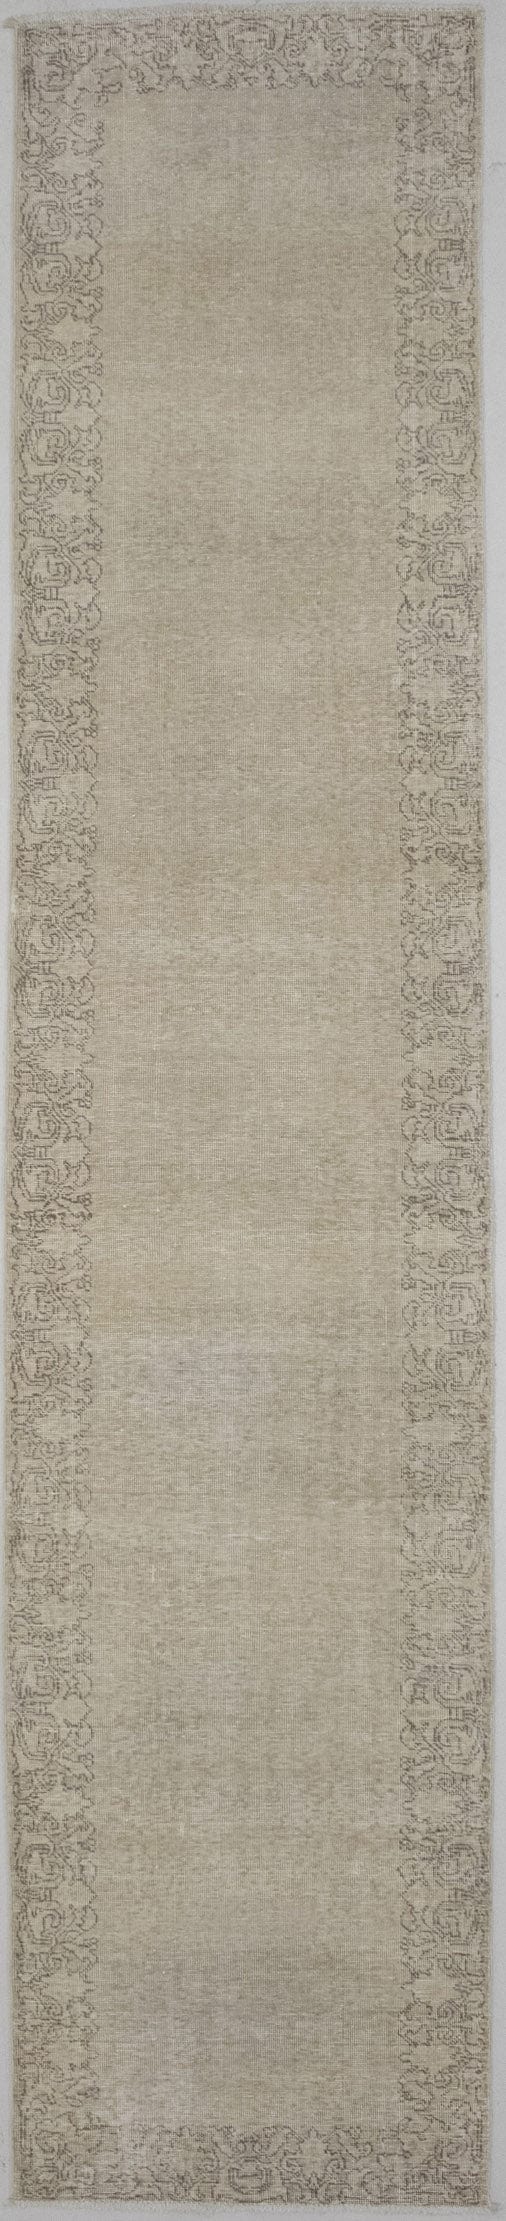 Antique Muted Distressed 3X13 Tabriz Persian Runner Rug